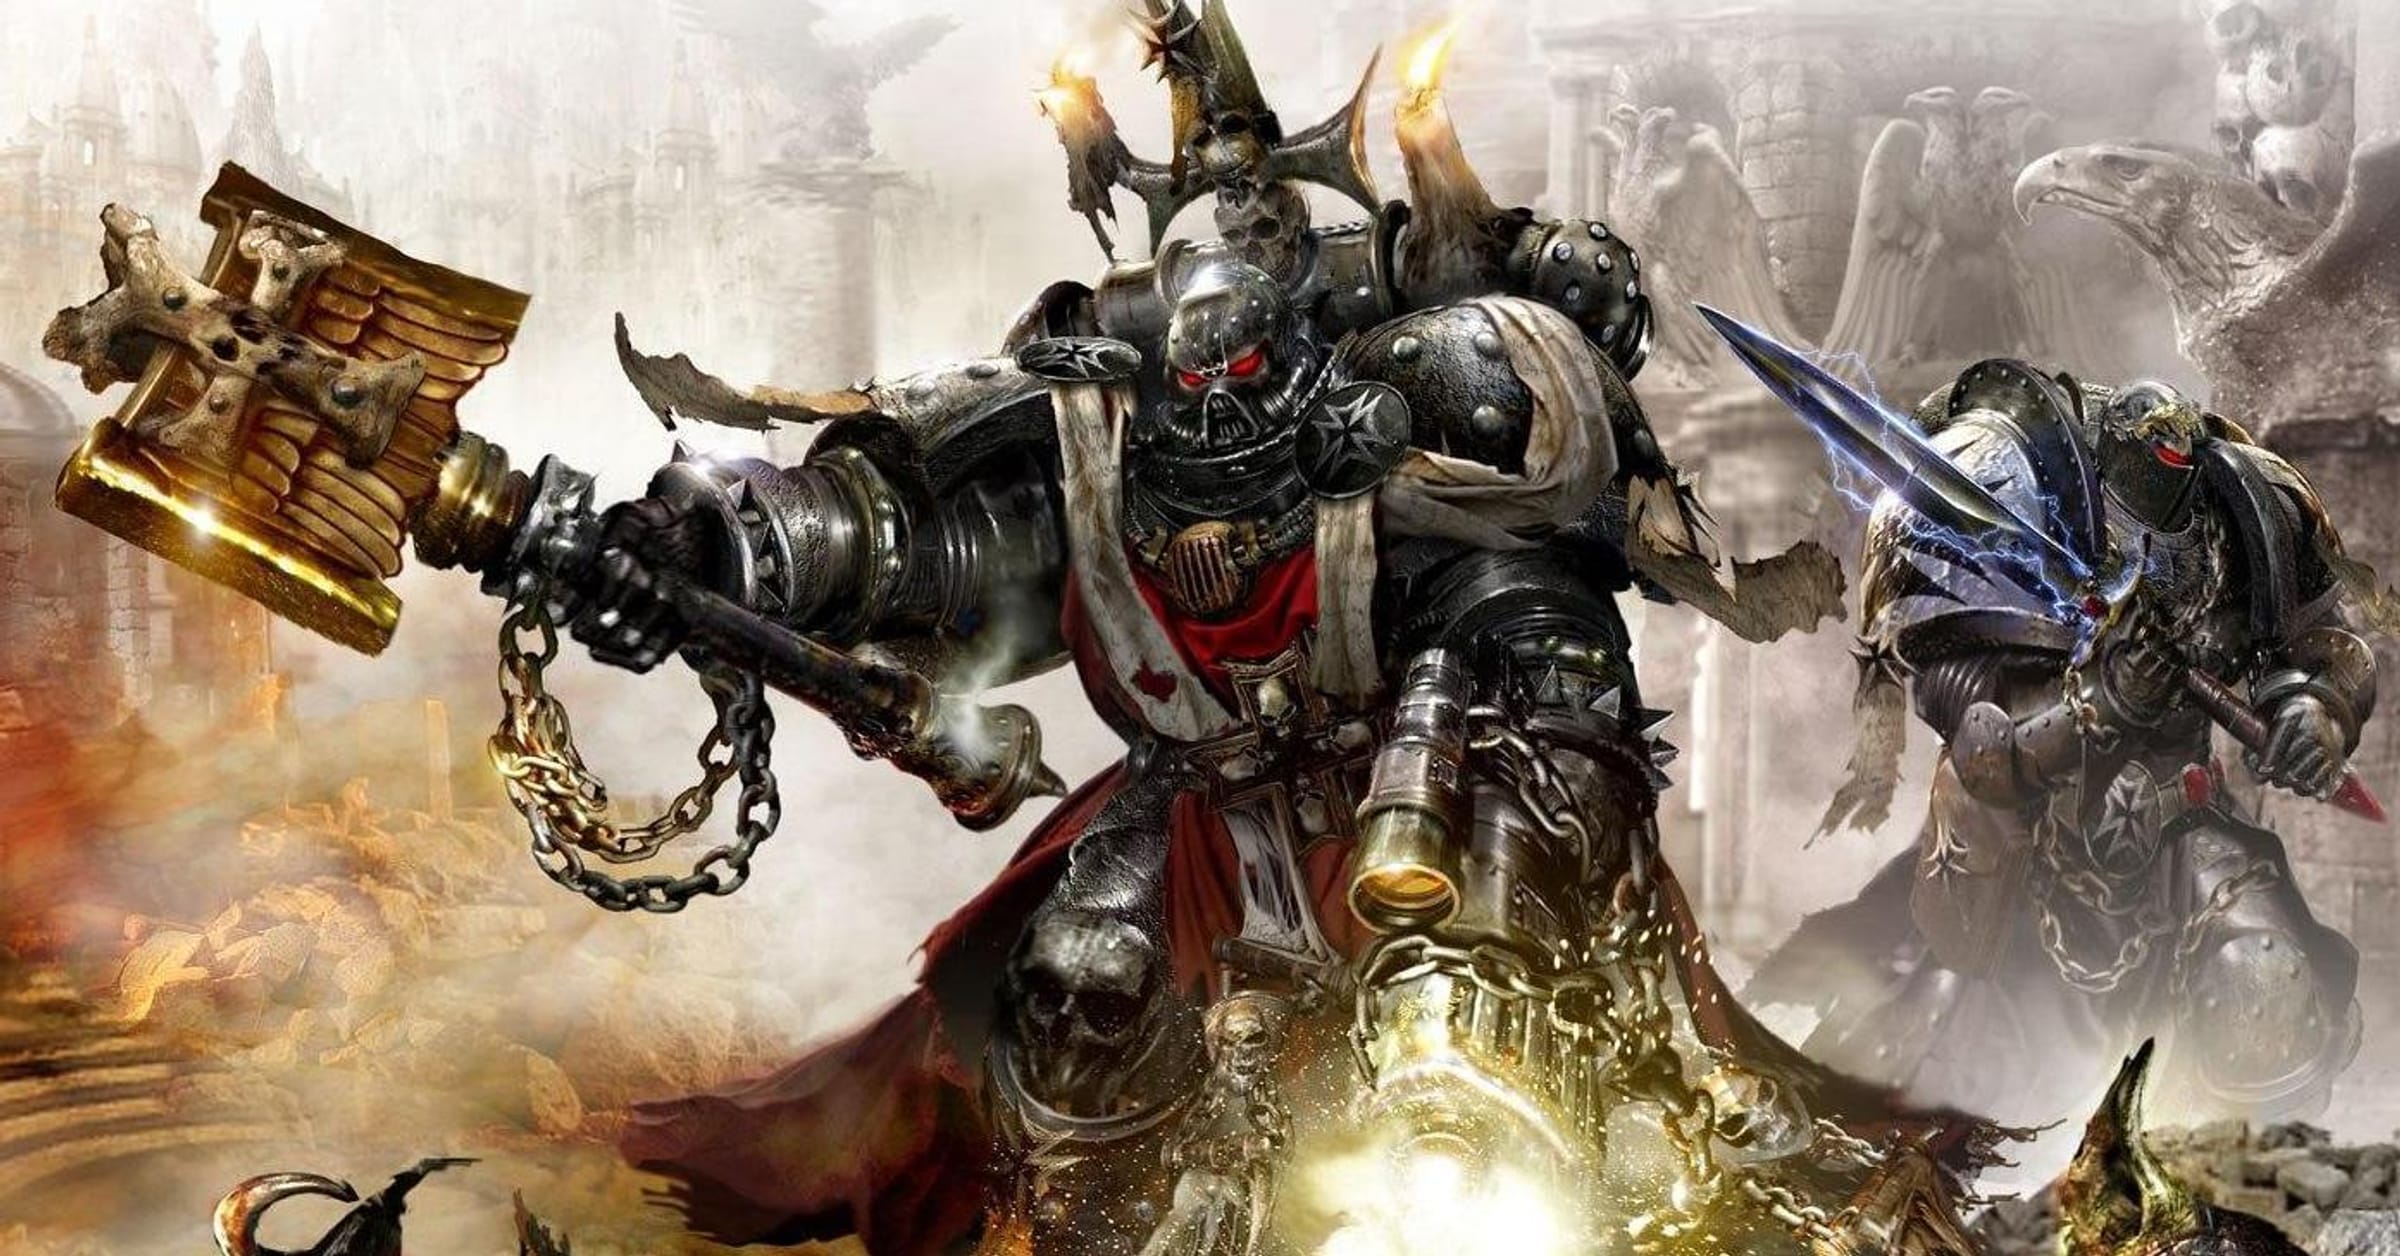 The Orks of Warhammer Fantasy and Warhammer 40k - Lore Overview 